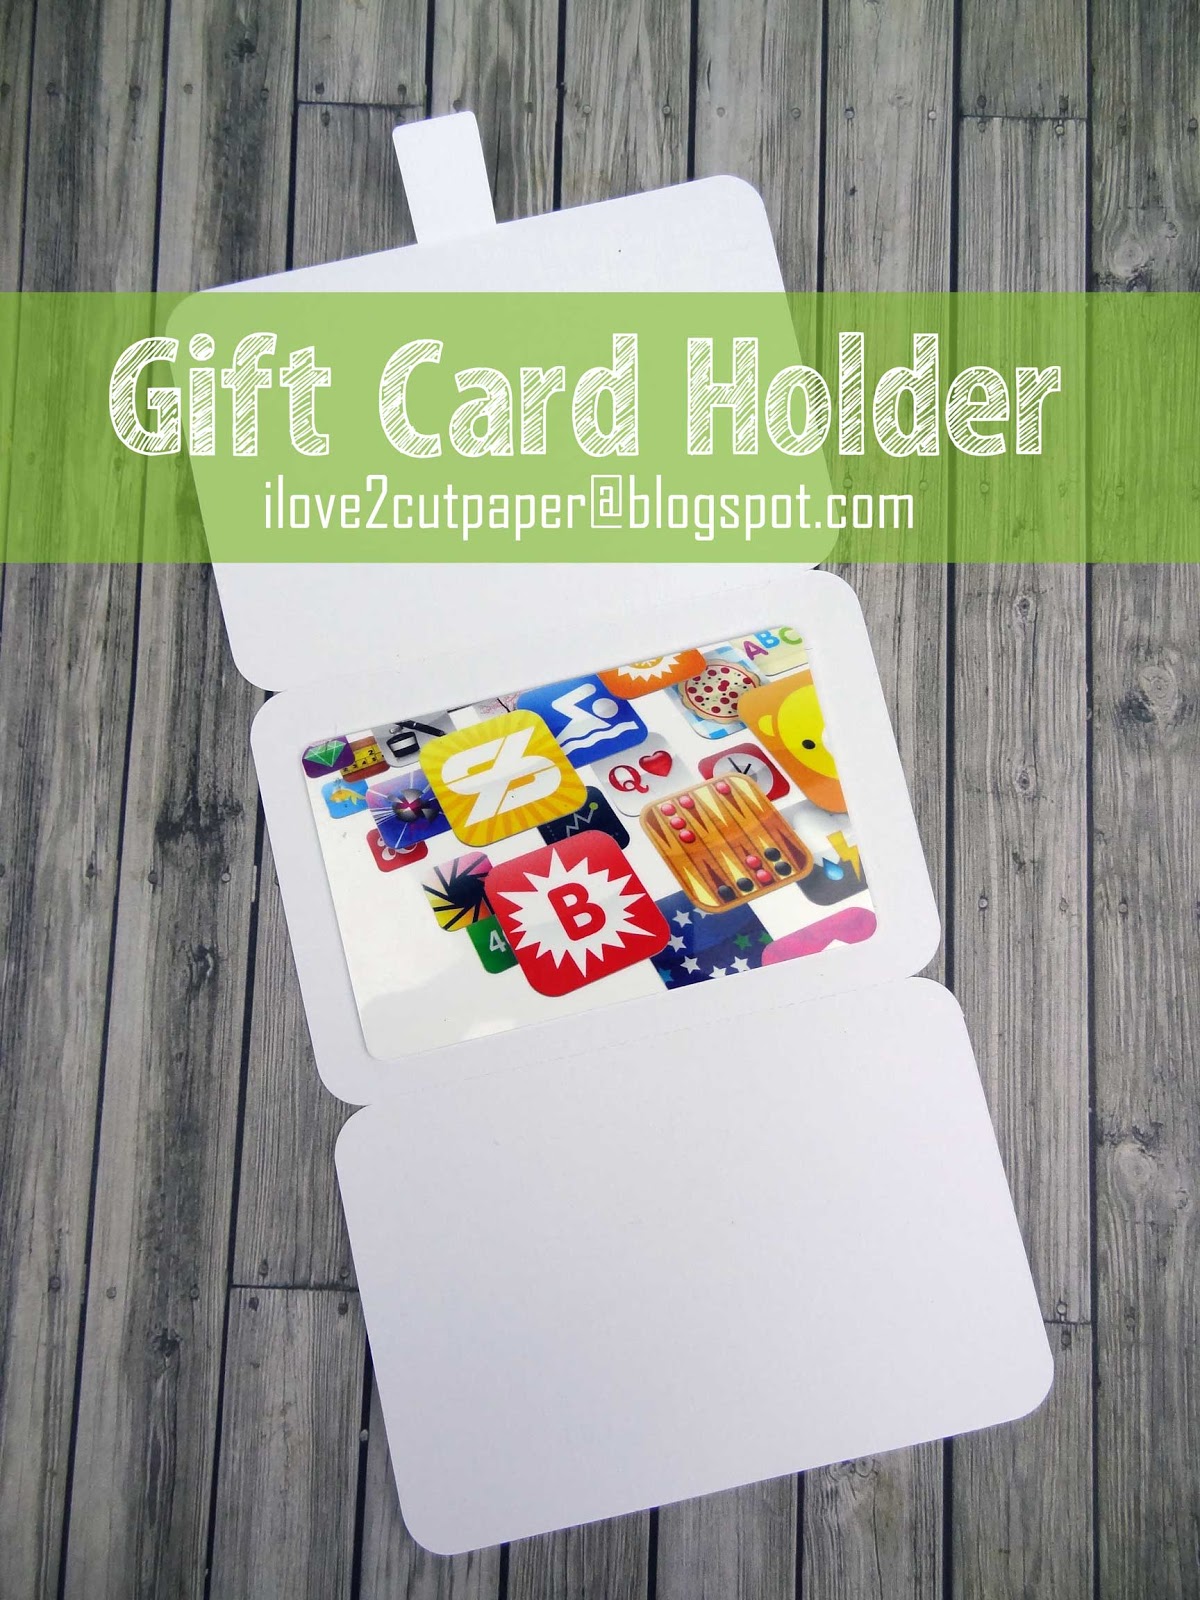 Download i love 2 cut paper: Cassette Gift Card Holder and FREE ...